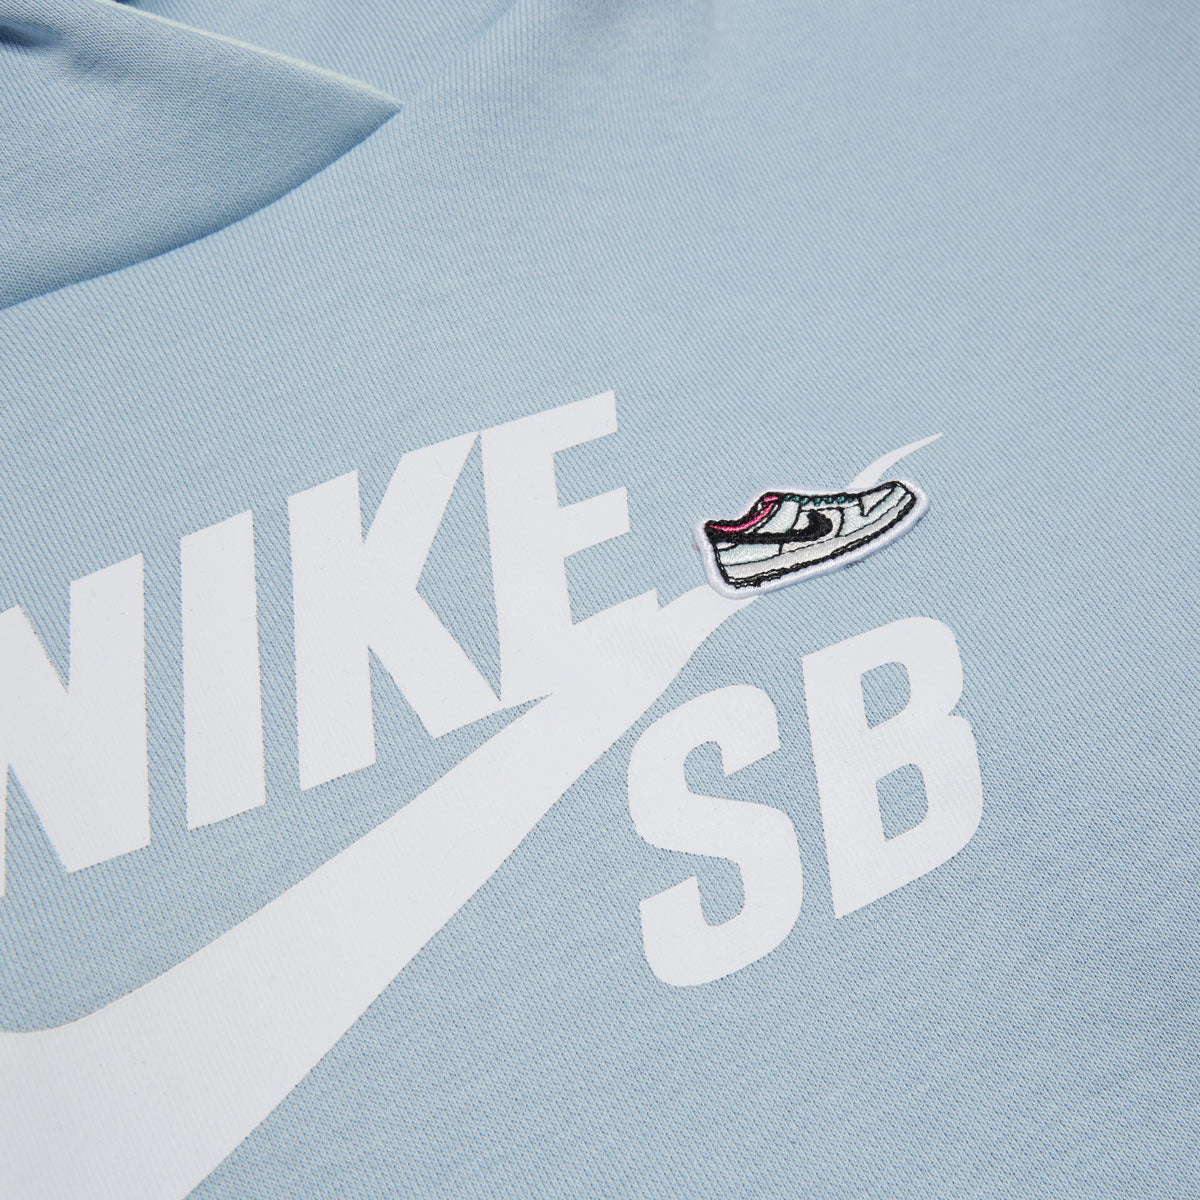 Nike SB Youth Icon Fleece Easy On Hoodie - Light Armory Blue/Barely Green/White image 4